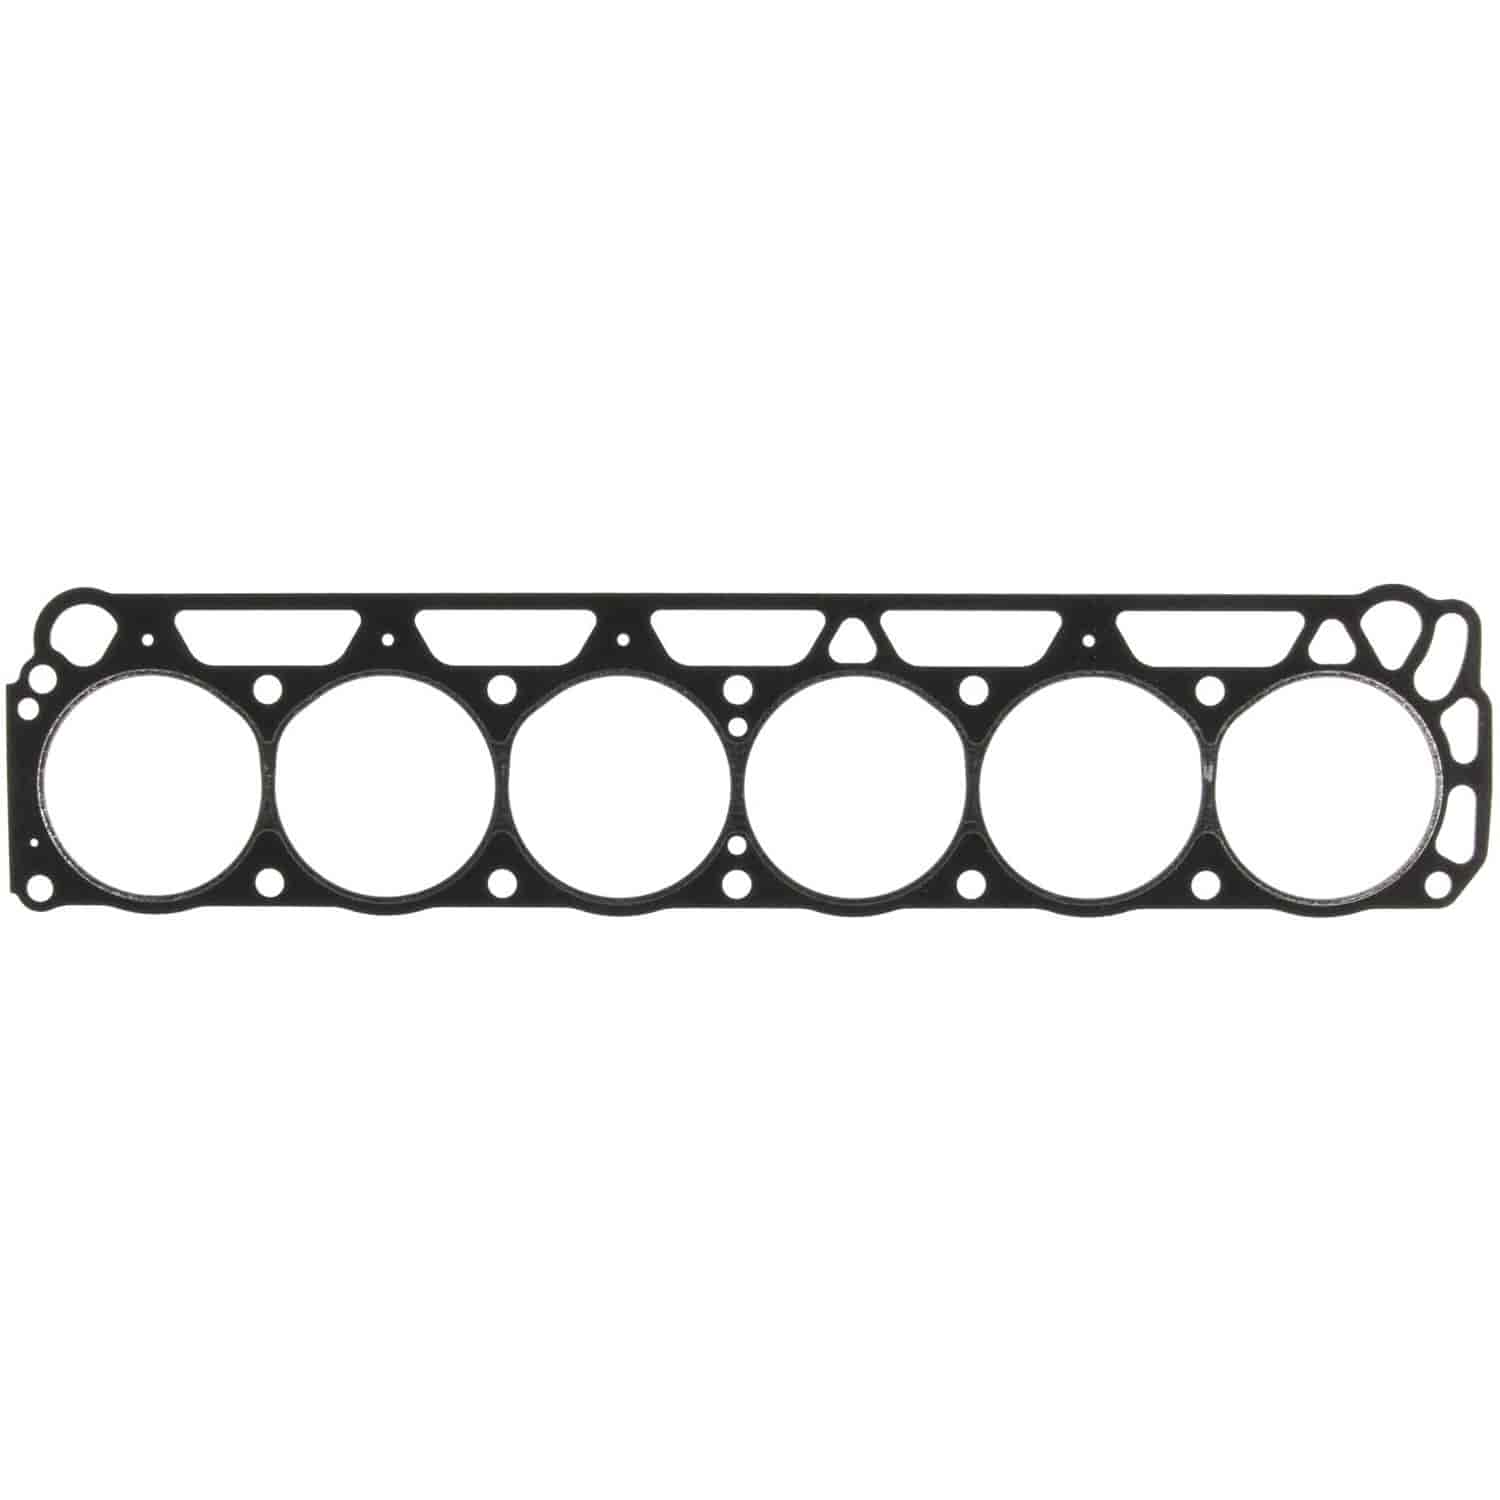 Cylinder Head Gasket Ford-Pass Trk&Ind Merc 144 170 200 250 60-83 VC